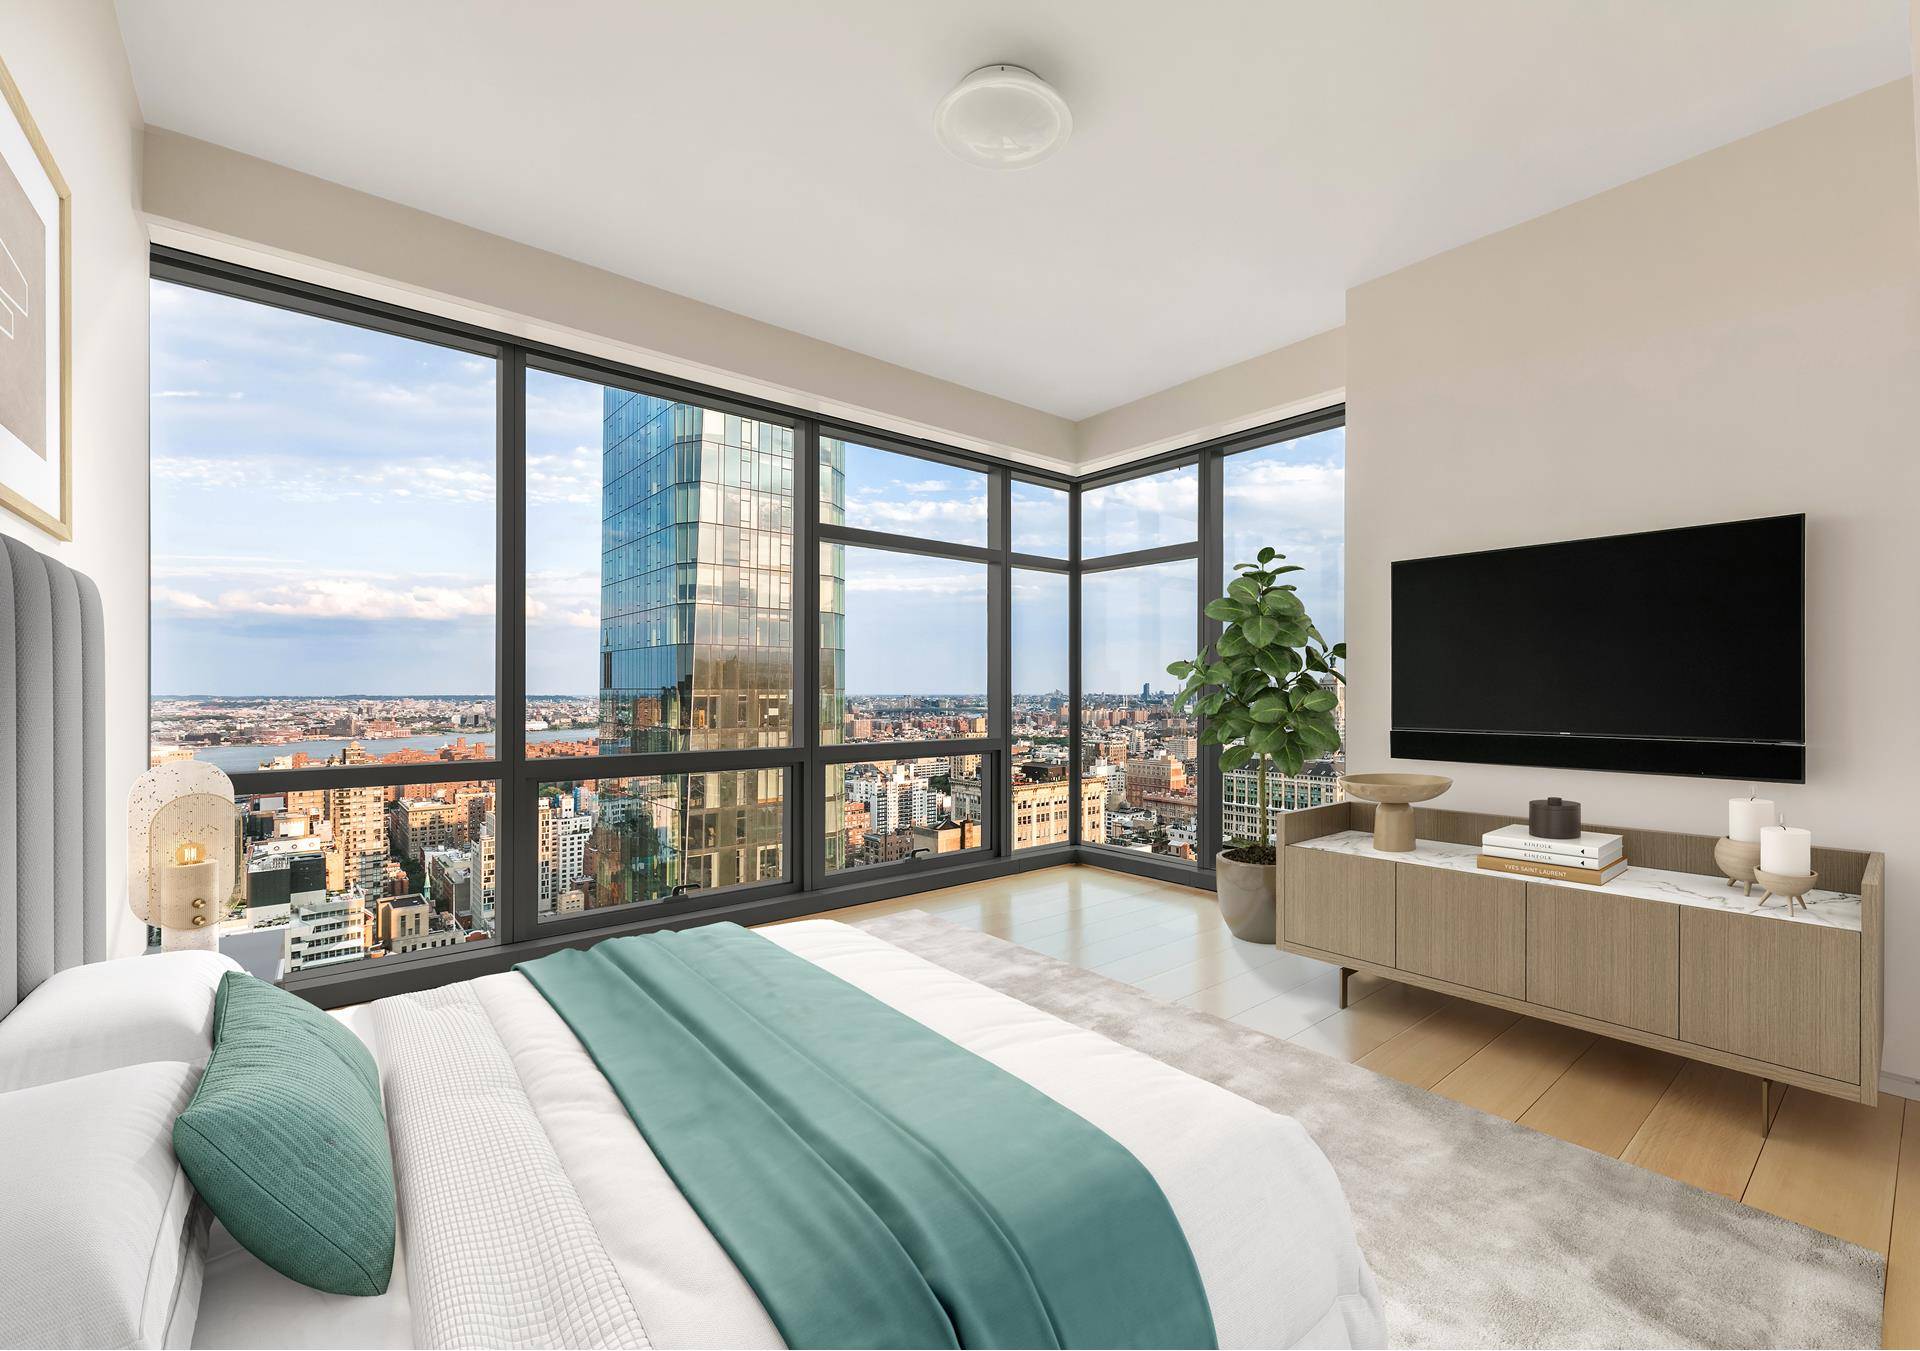 An unparalleled luxury living experience awaits you at the striking ultra modern One Madison condominium towering 60 stories over New York City !